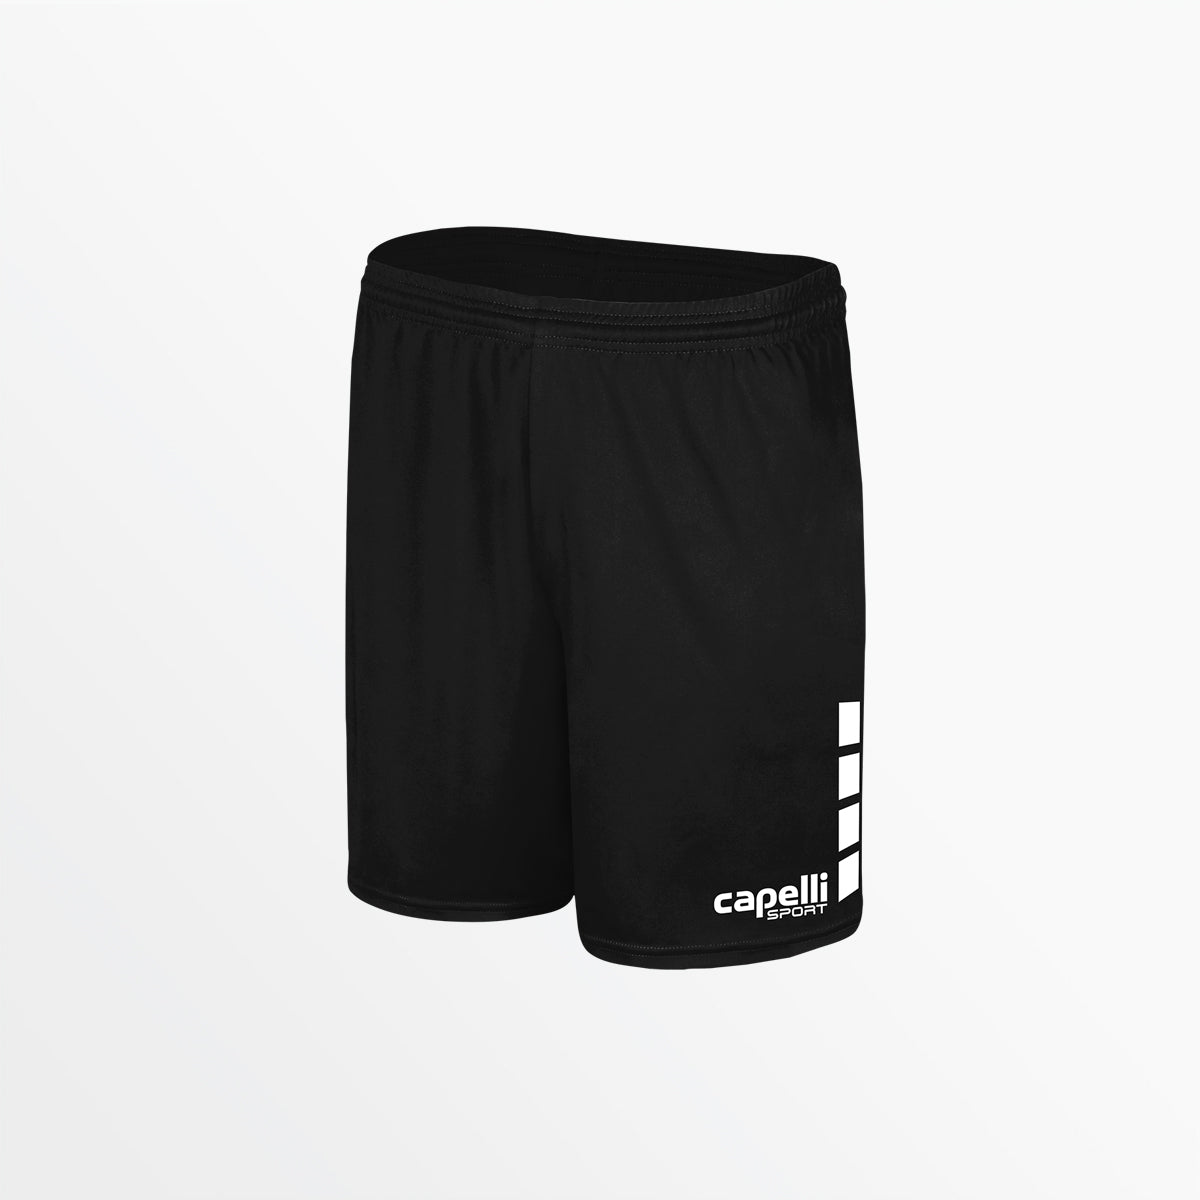 WOMEN'S TEAM MATCH SHORTS WITH 5